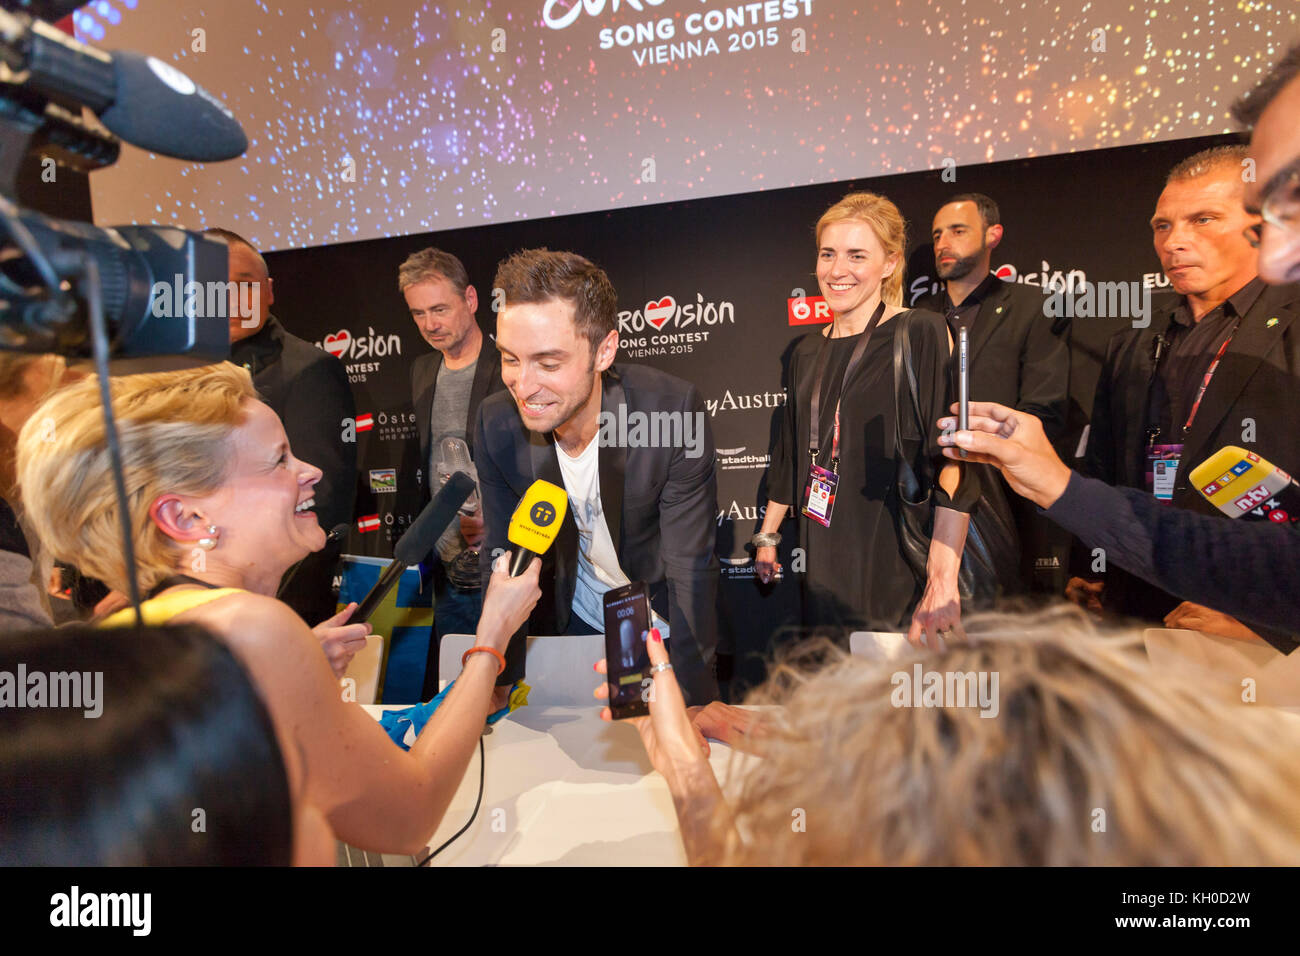 Eurovision Song Contest winner Måns Zelmerlöw, from Sweden, gives a press conference after the Grand Final of the 60th edition of Eurovision Song Contest, 2015 in Vienna. Stock Photo